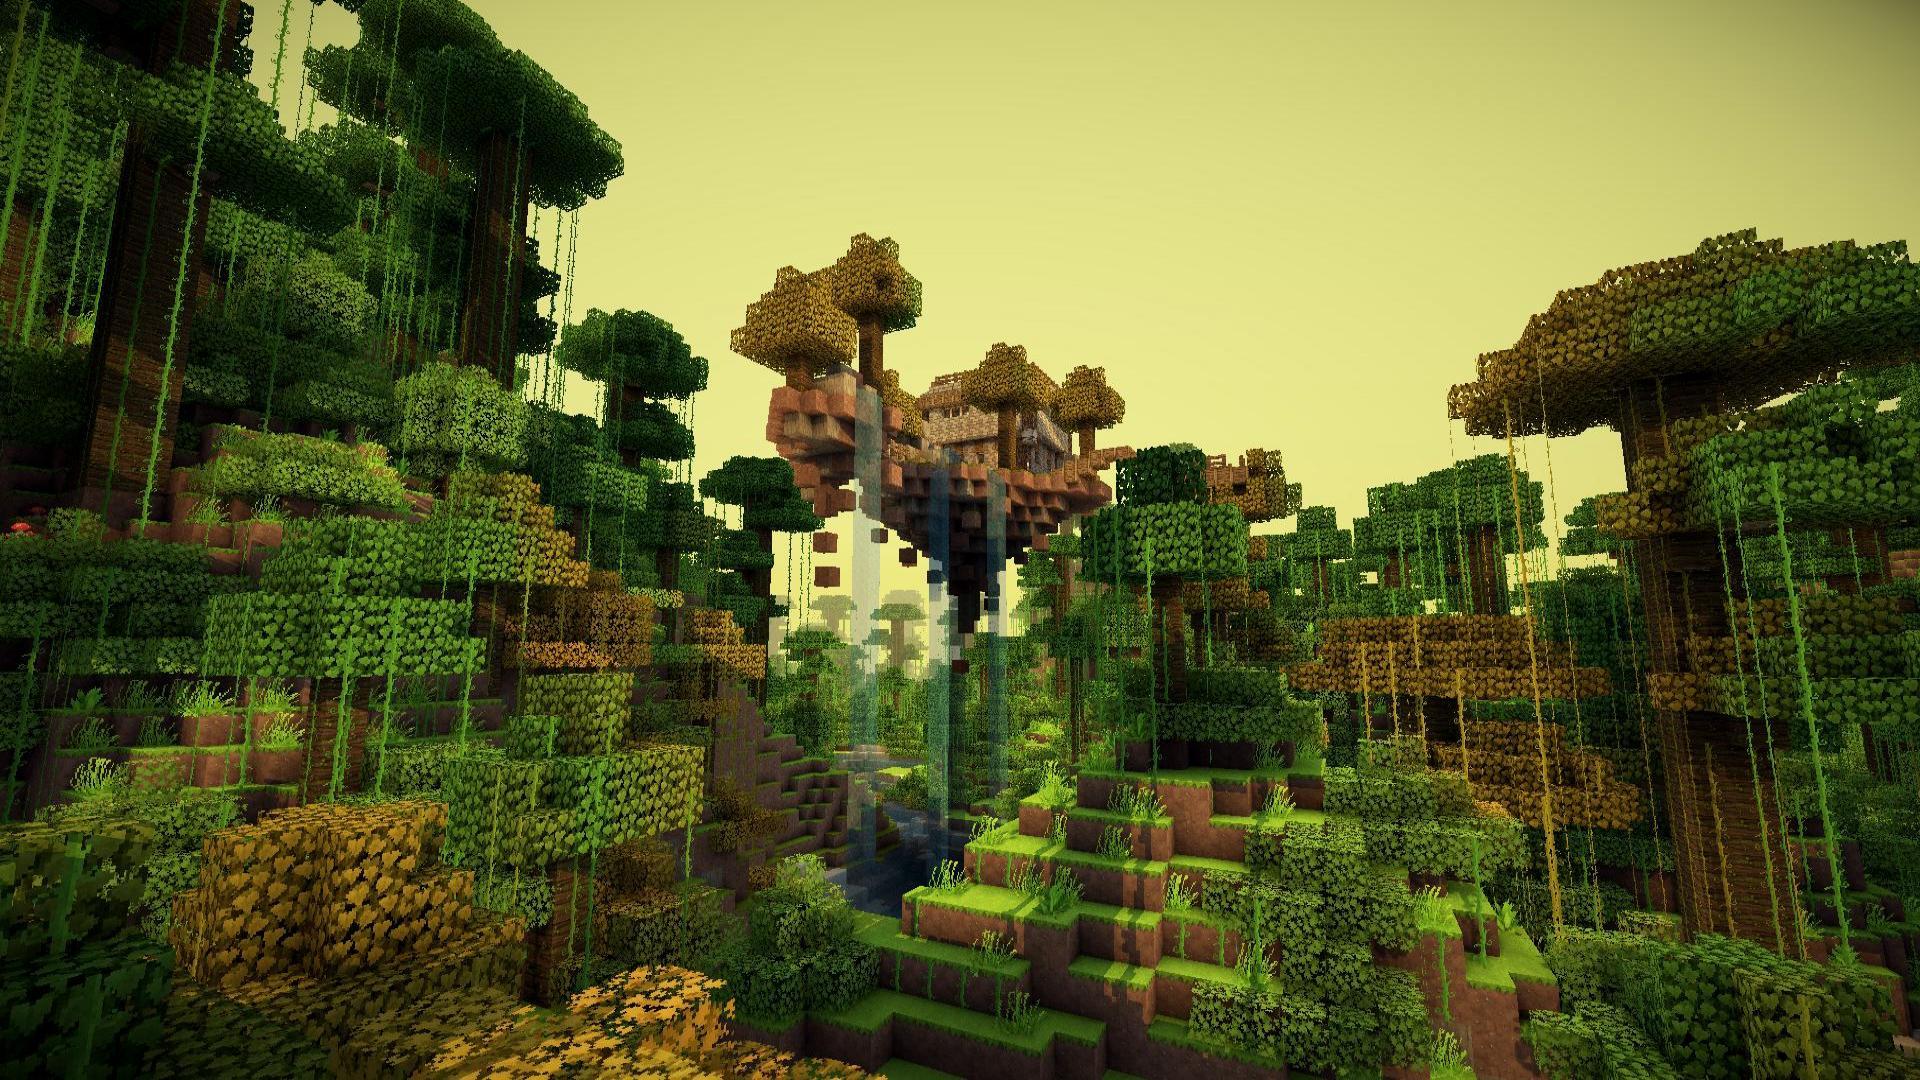 Wallpaper.wiki Minecraft HD Picture Download PIC WPE006303